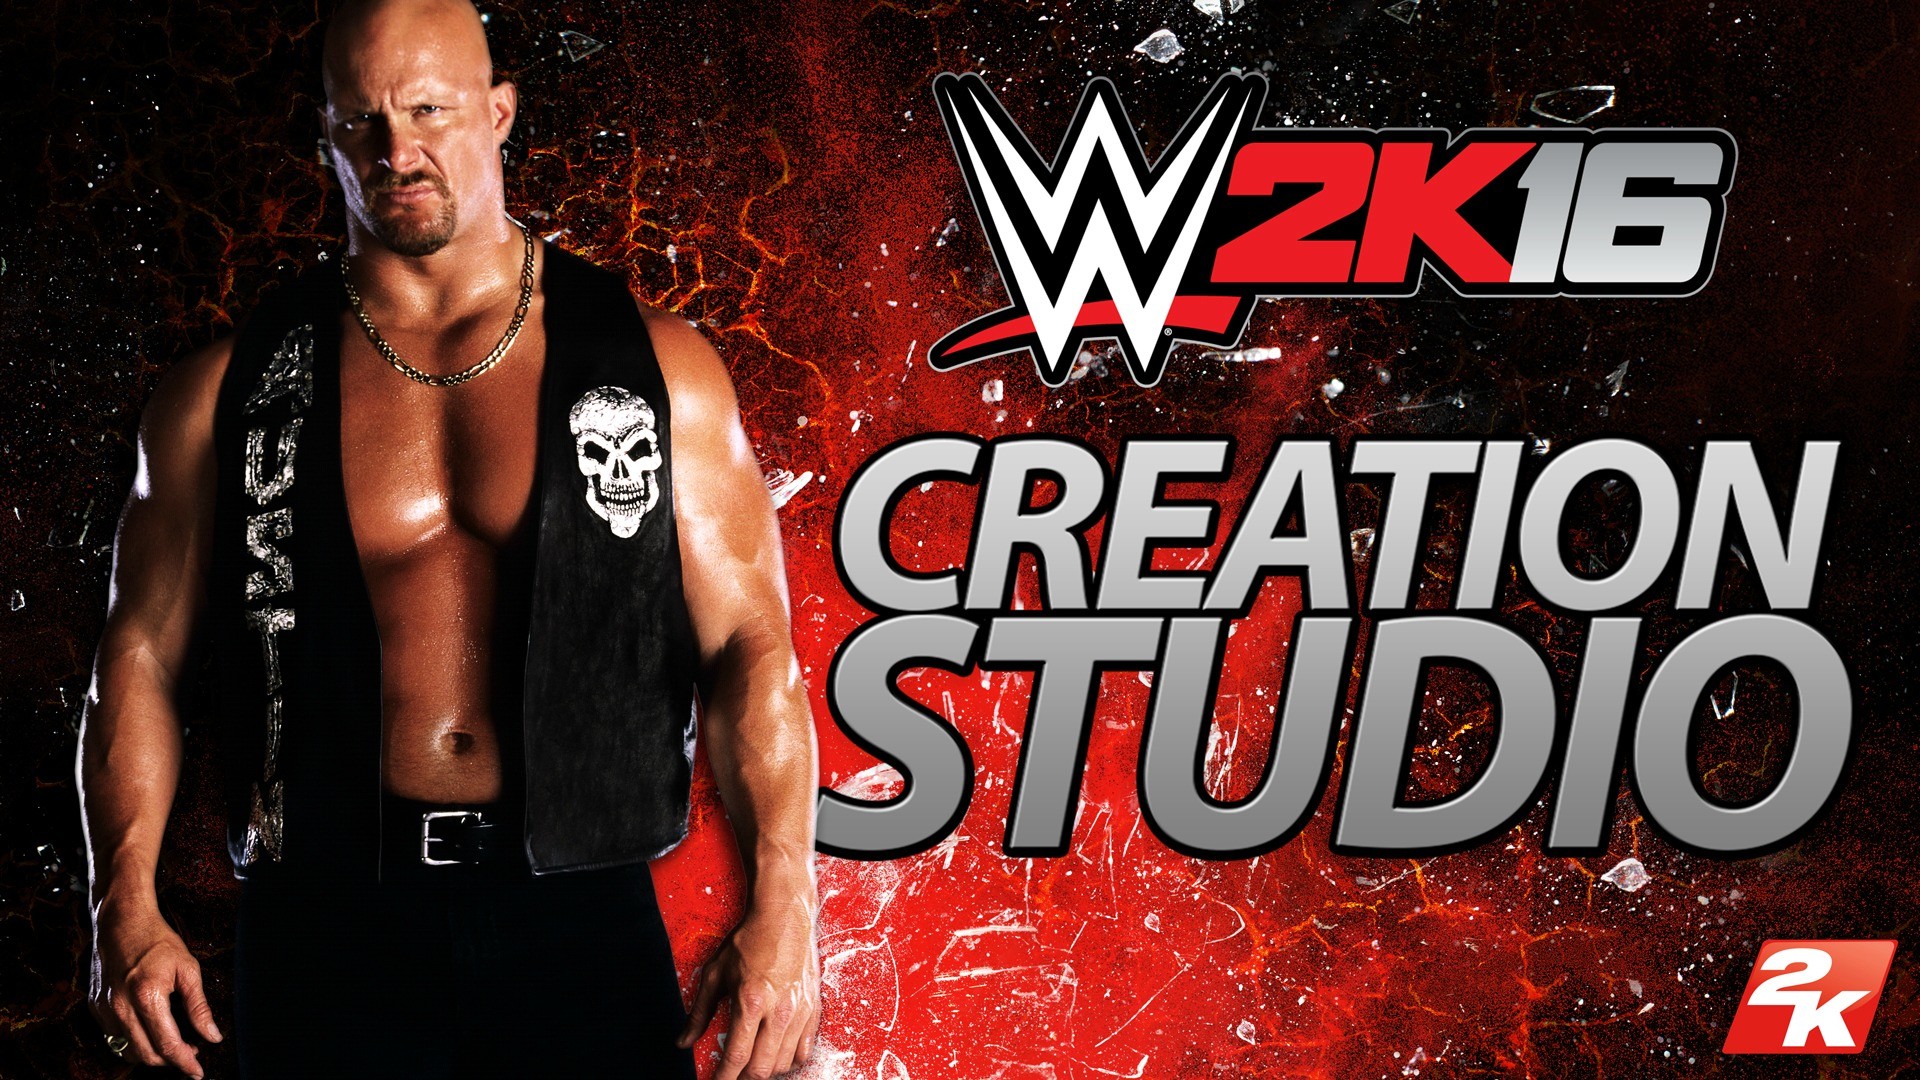 1920x1080 WWE 2K16 Creation Studio App is Out Now on iOS and Android - WWE 2K16  Coverage - News & Updates